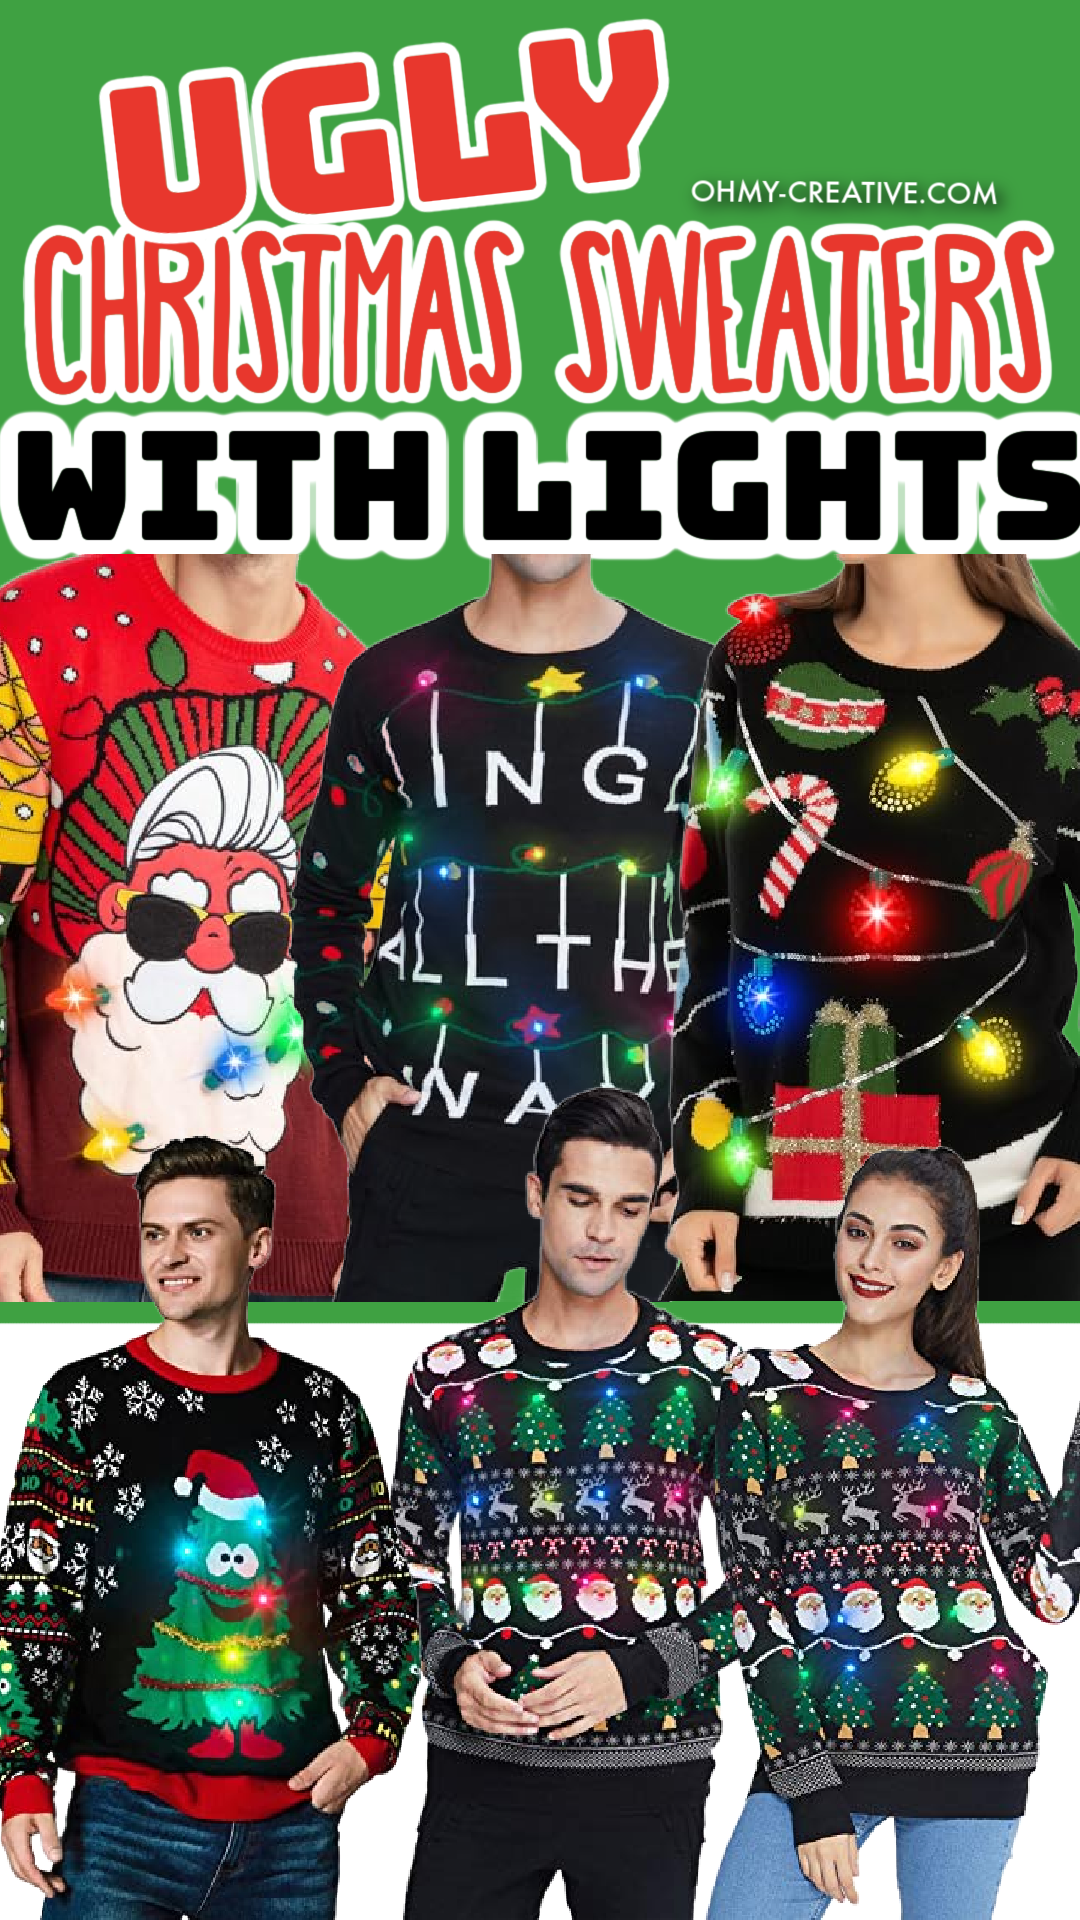 A collage of Ugly Christmas sweaters with lights that light up!